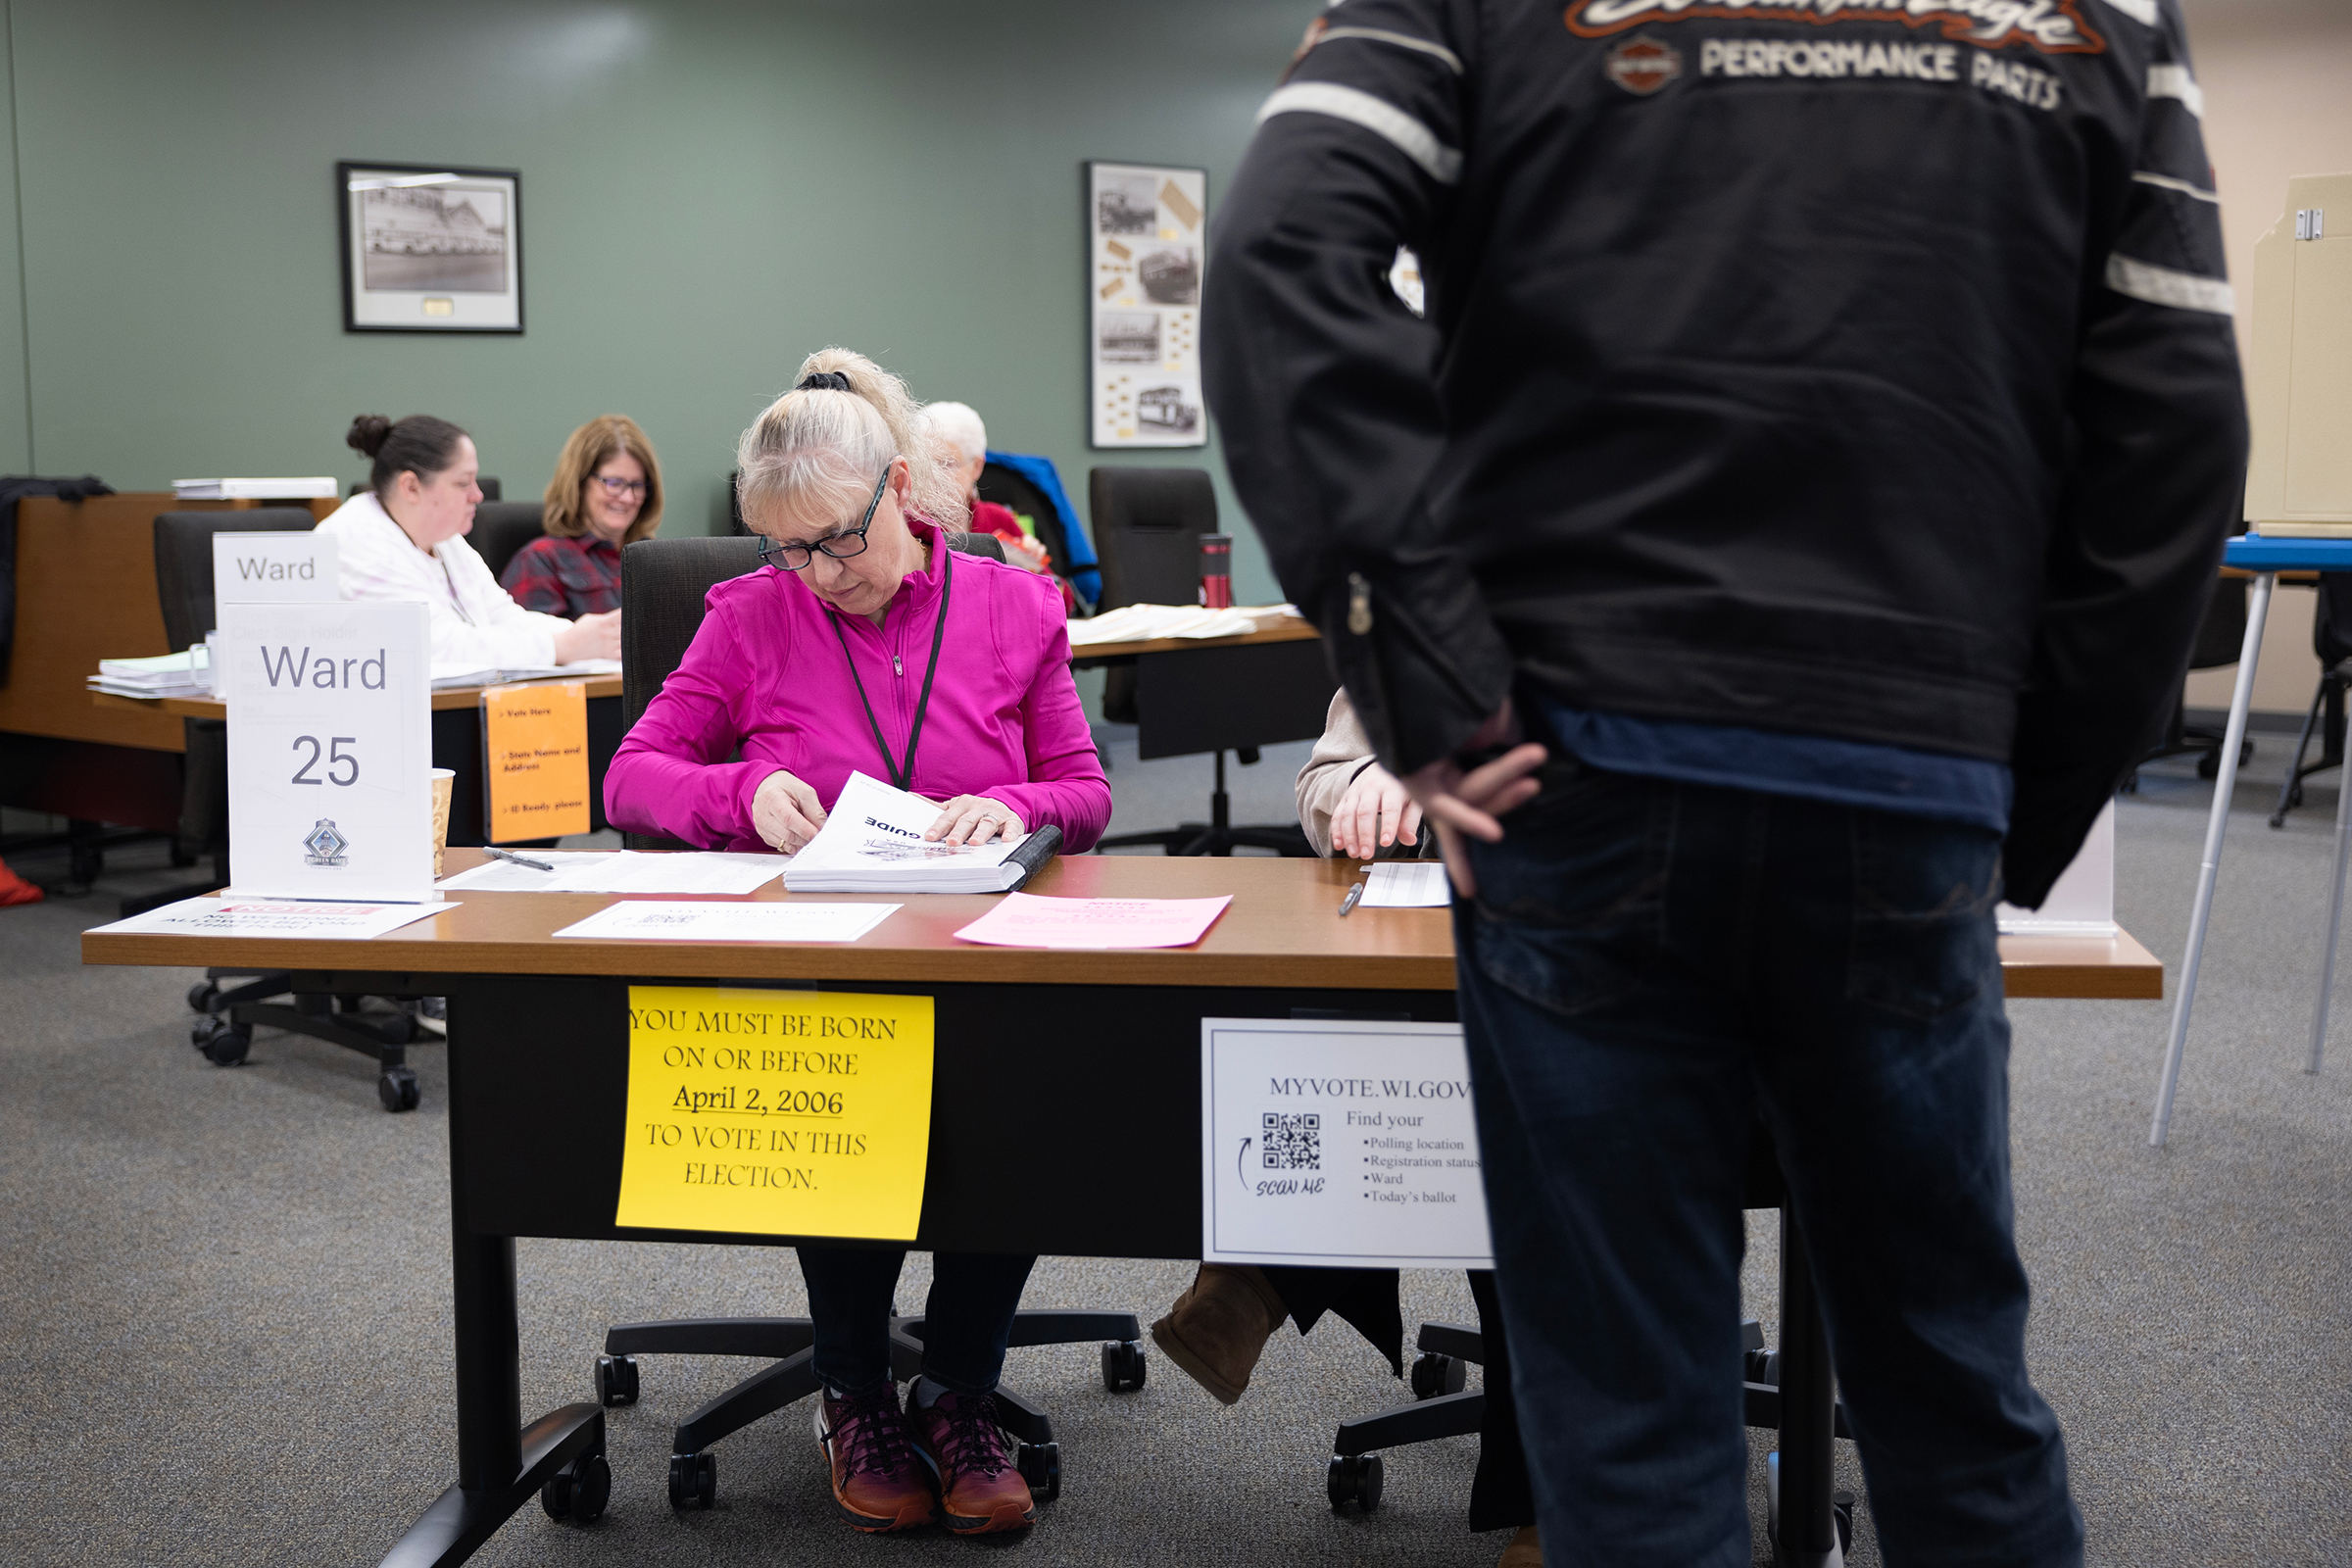 A resident arrives to vote in the state's primary election at a polling location on April 2, in Green Bay, Wisconsin.